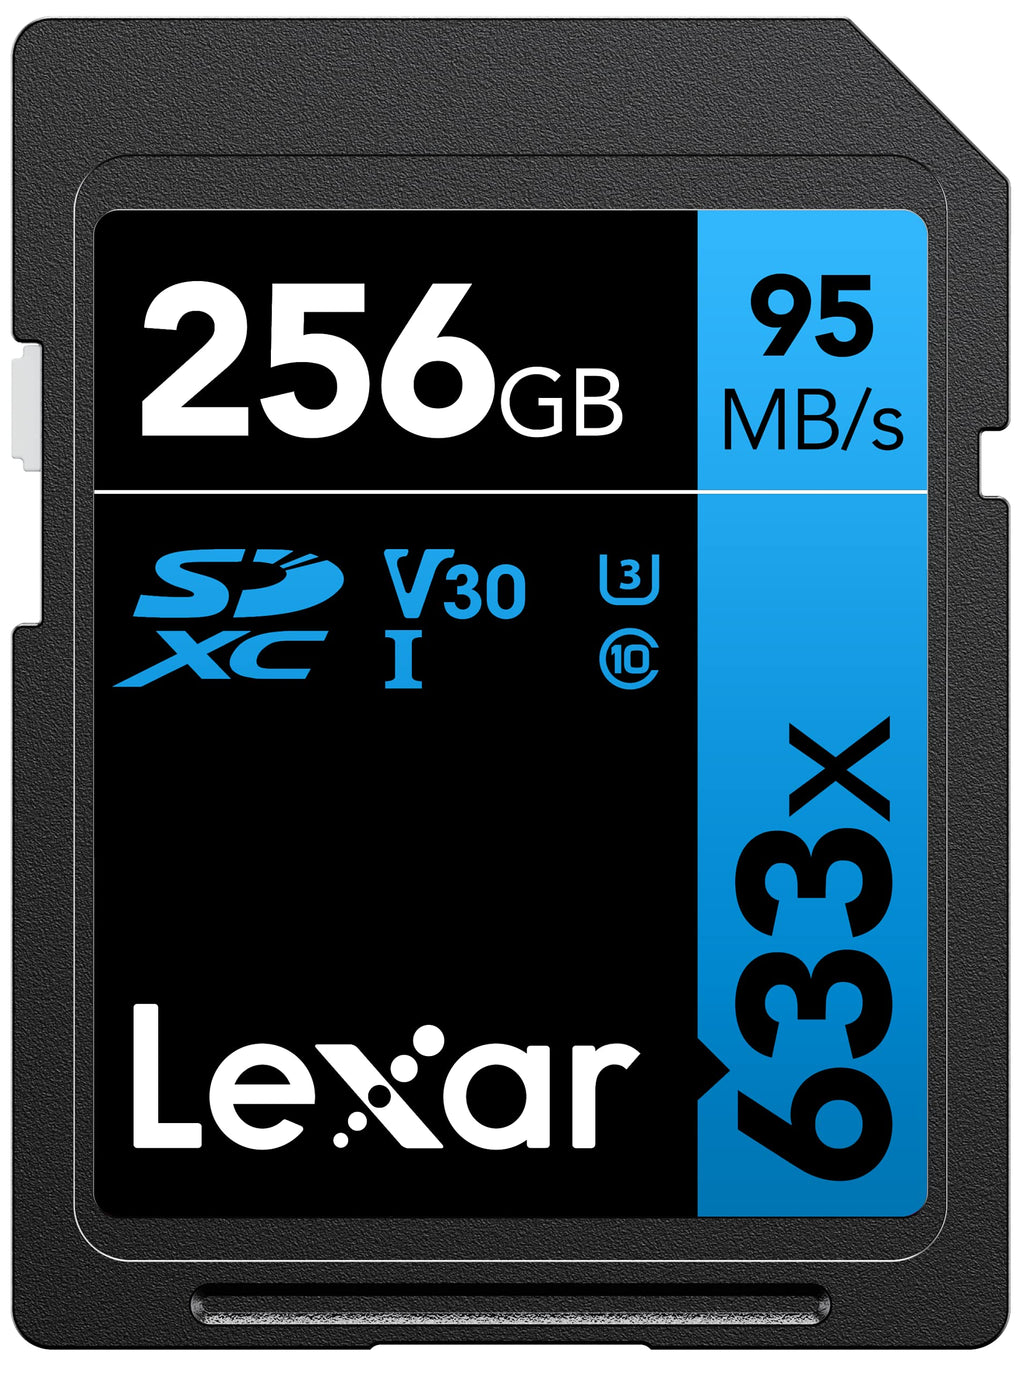 Lexar Professional 633x 256GB SDXC UHS-I Card, Up To 95MB/s Read, for Mid-Range DSLR, HD Camcorder, 3D Cameras, LSD256CBNL633 (Product Label May Vary) Single